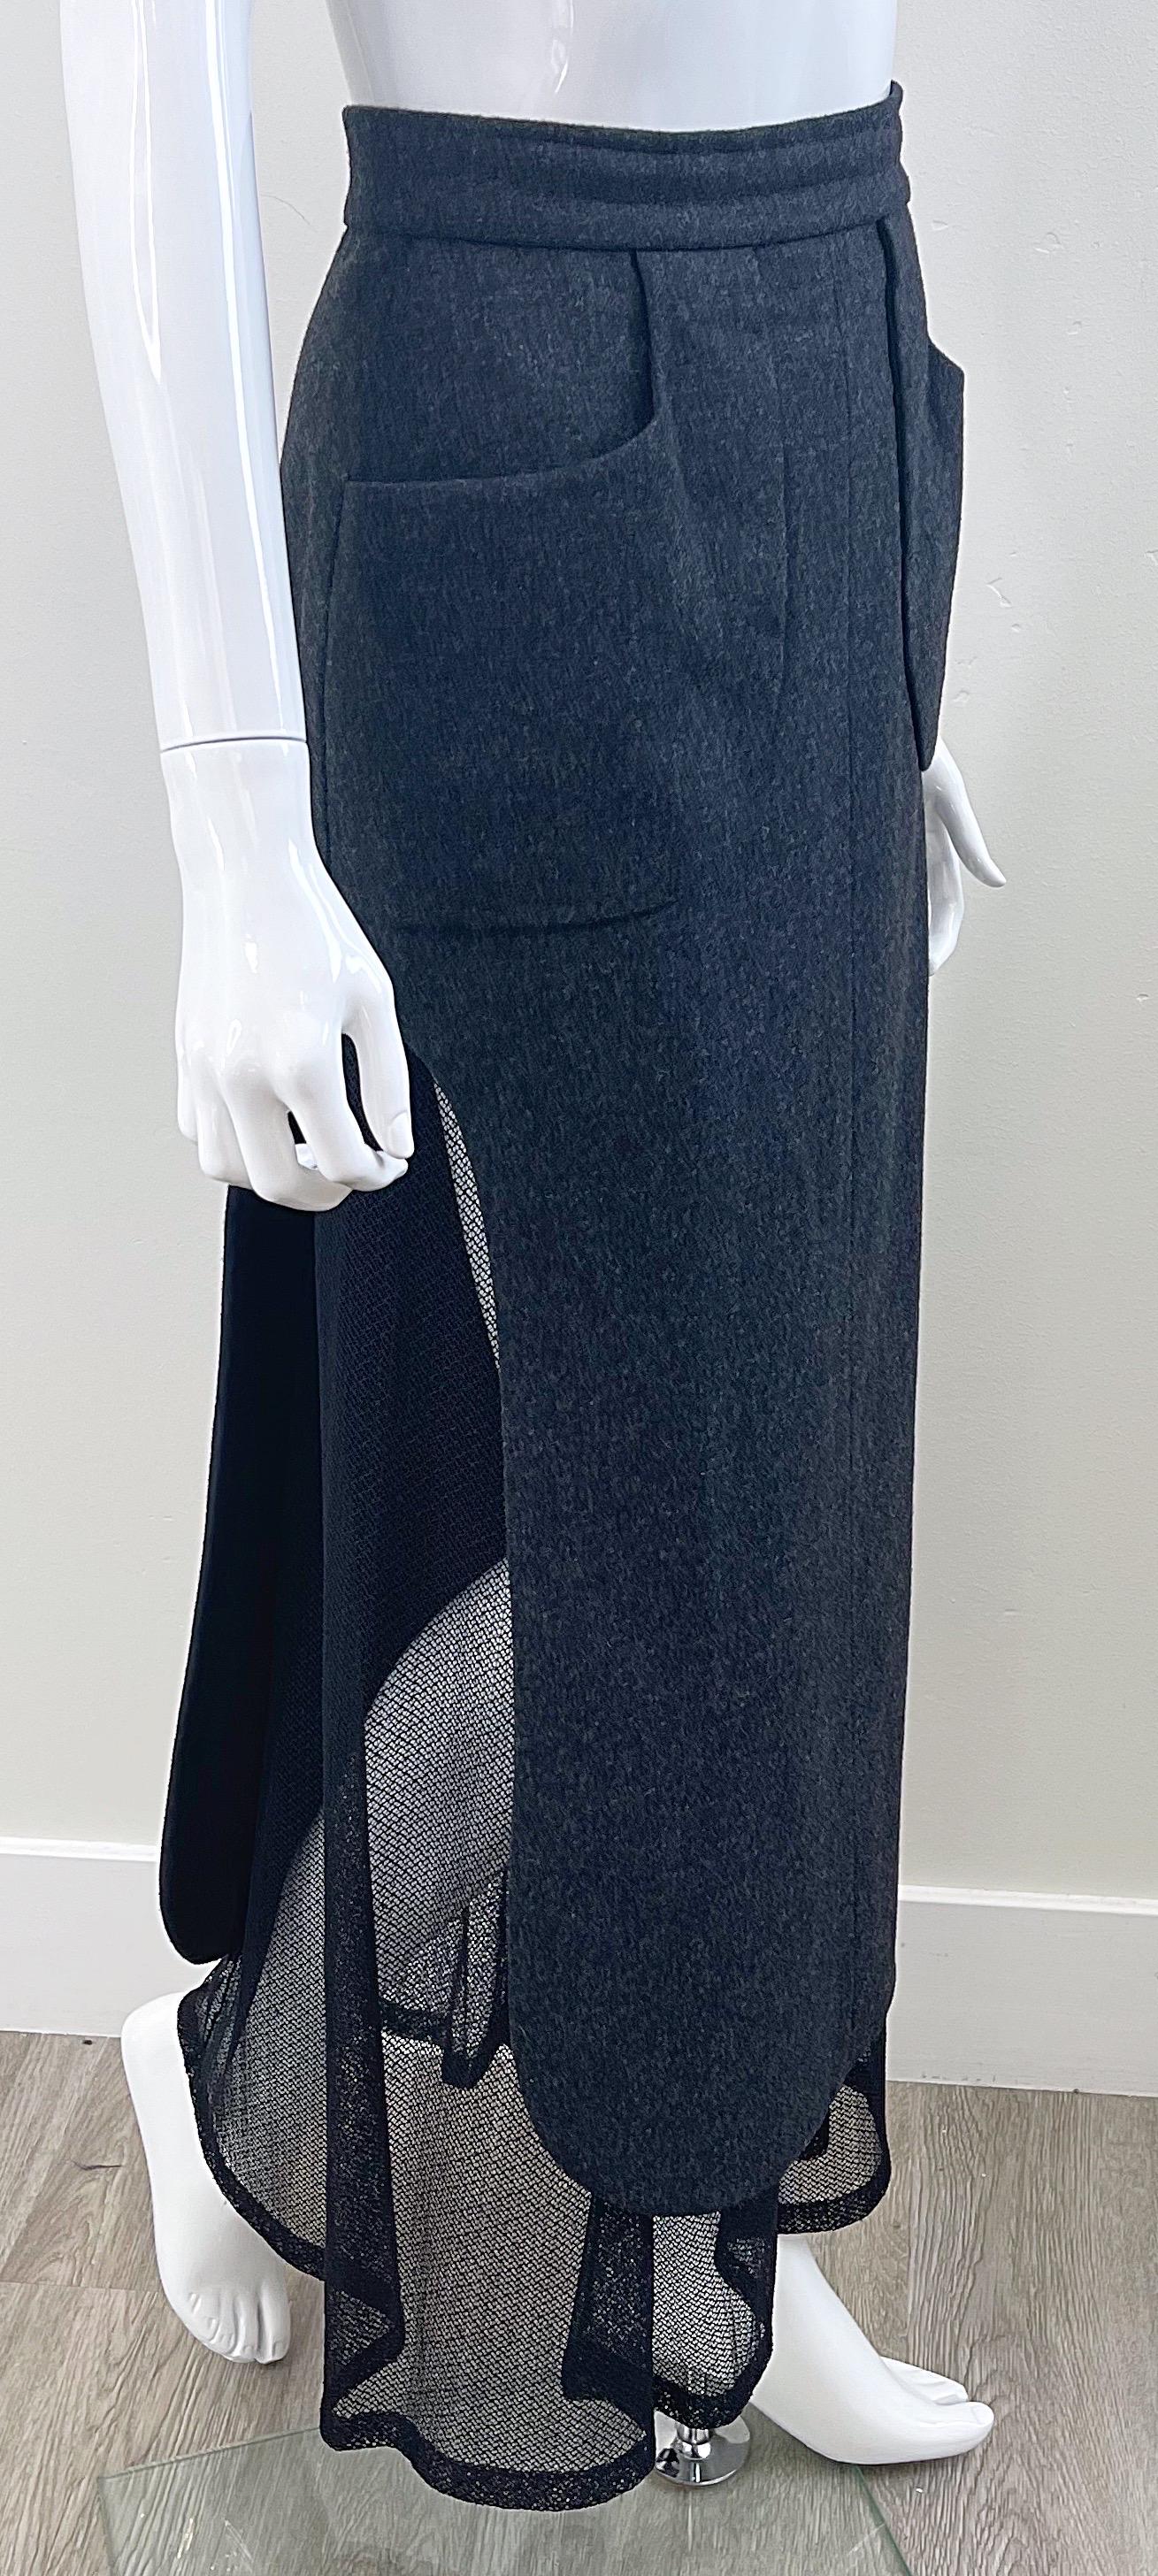 Karl Lagerfeld 1980s Grey Wool + Black Lace Vintage 80s Mini Maxi Skirt For Sale 9